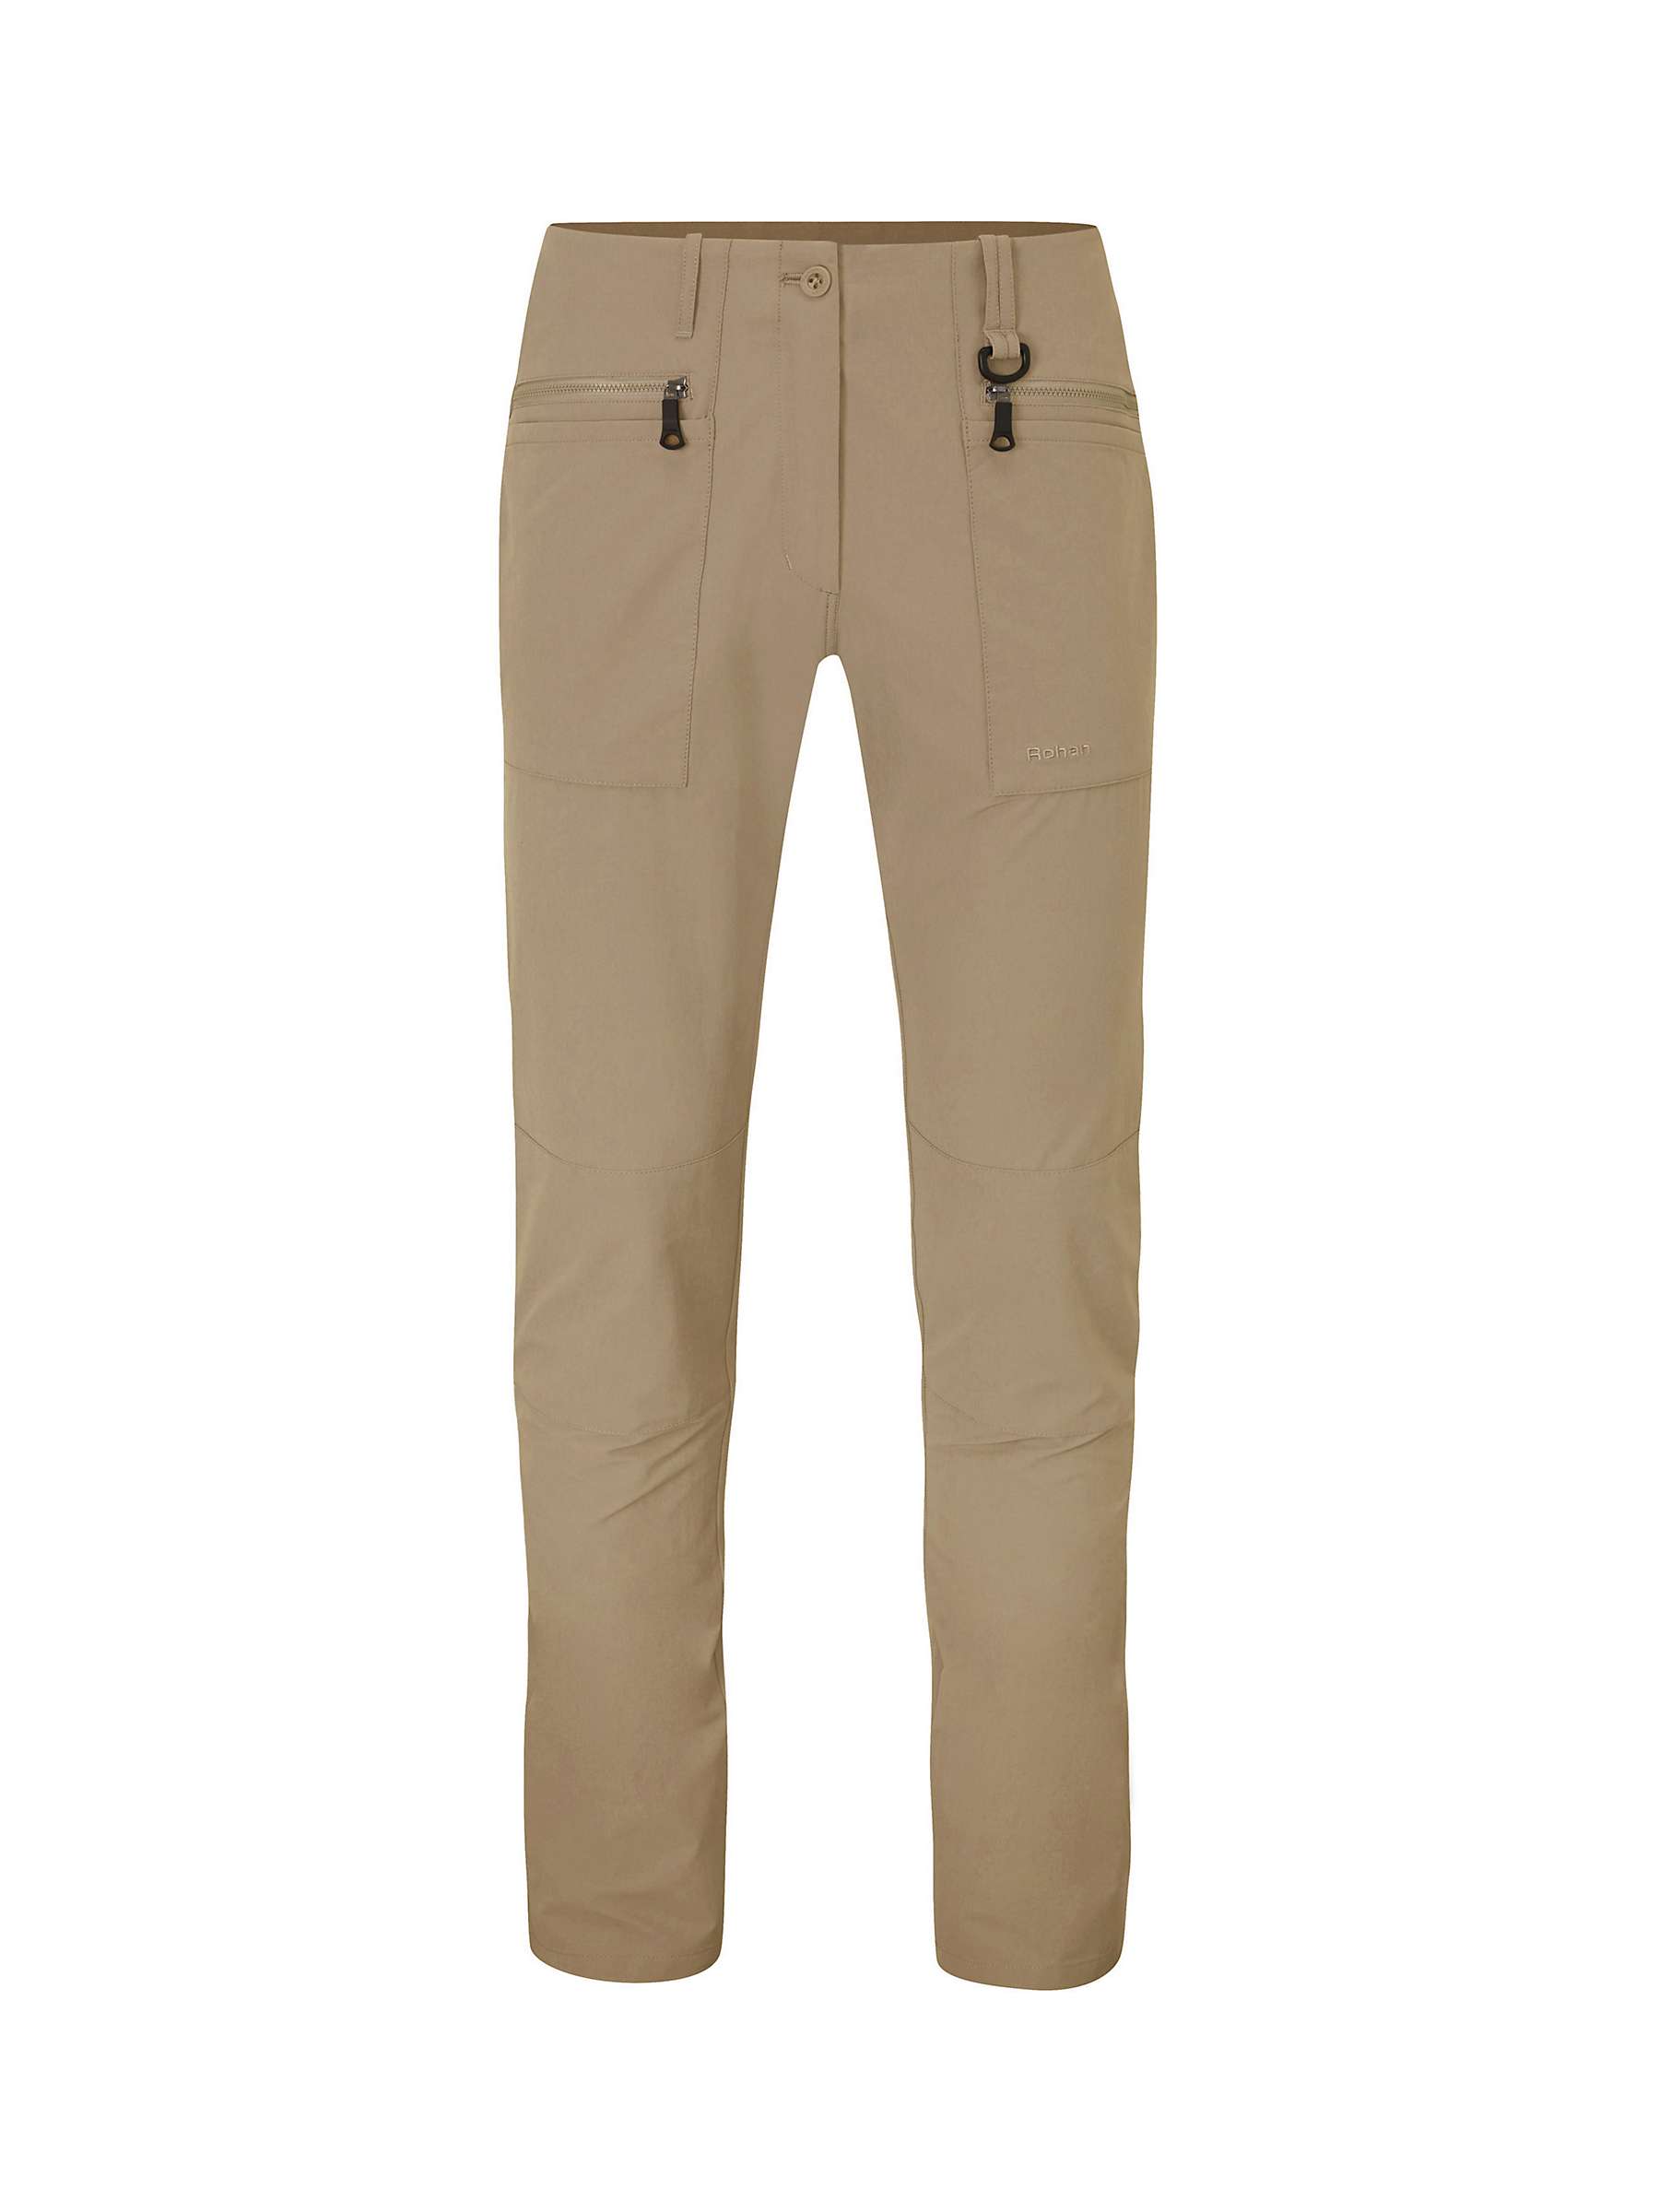 Buy Rohan Stretch Bags Outdoor Trousers Online at johnlewis.com